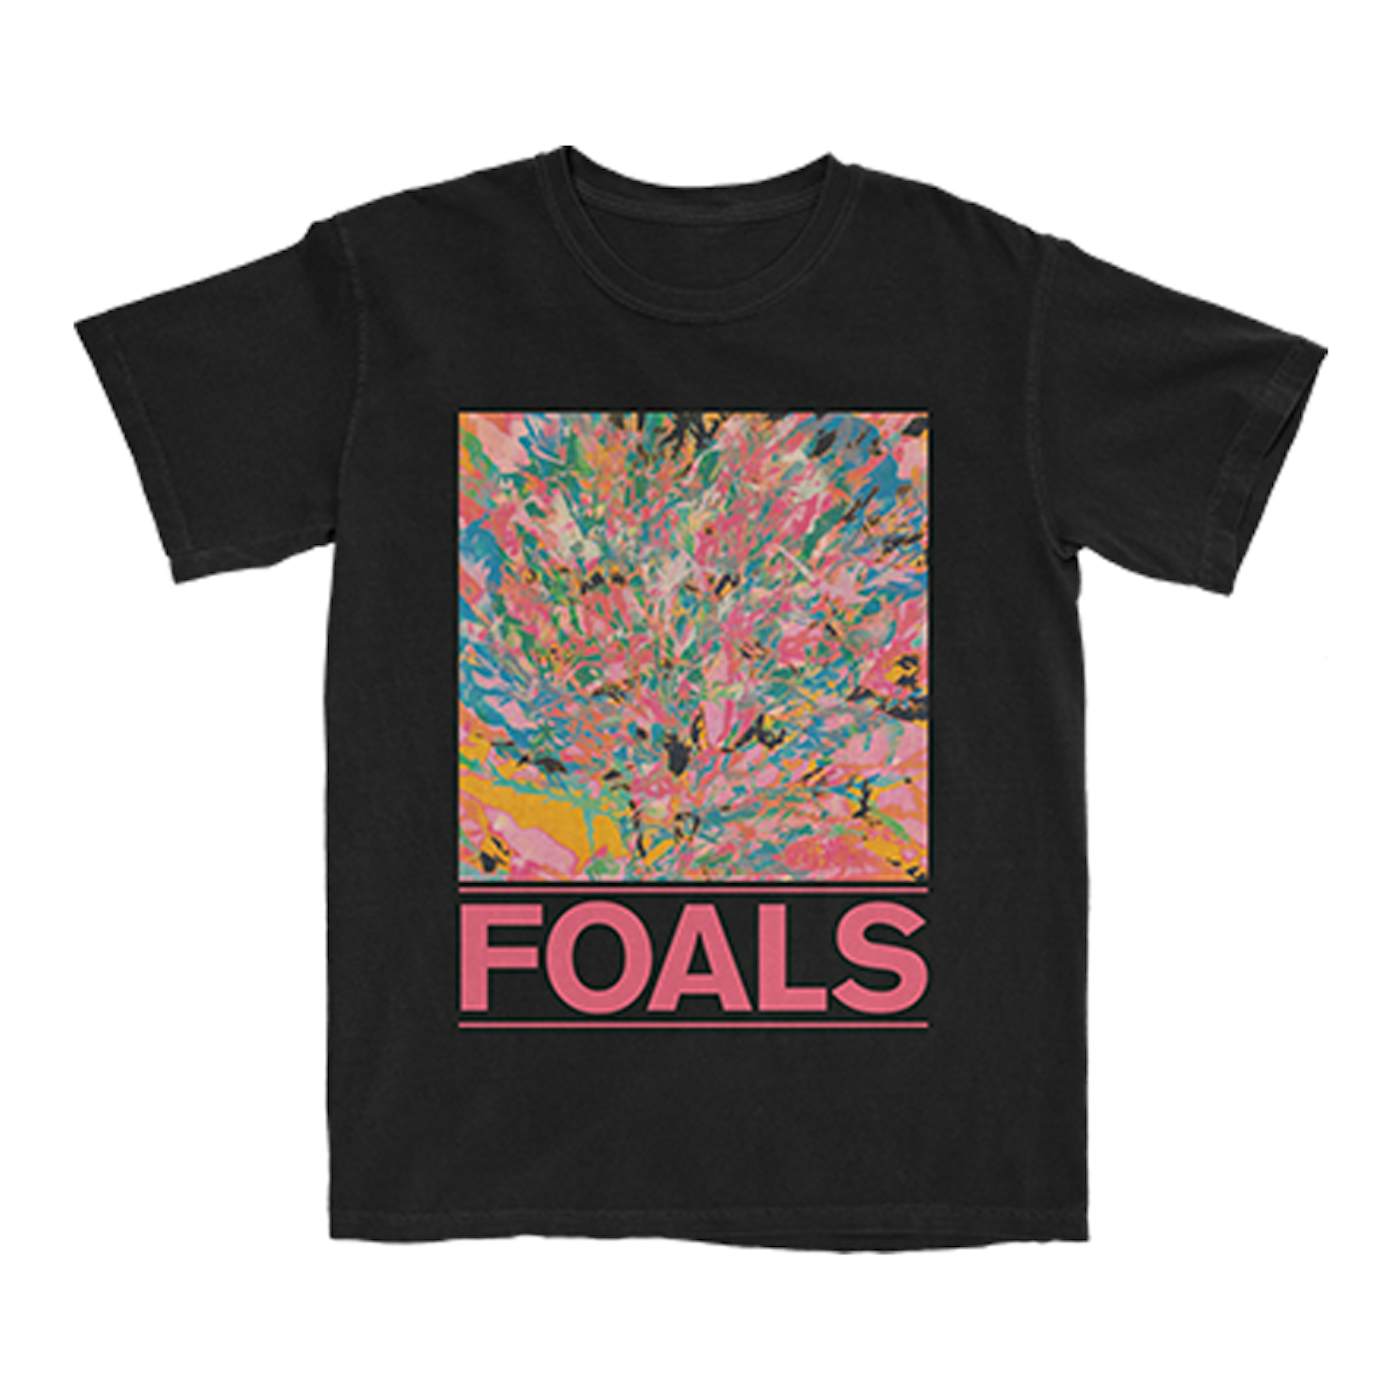 Foals Collected Reworks T-Shirt